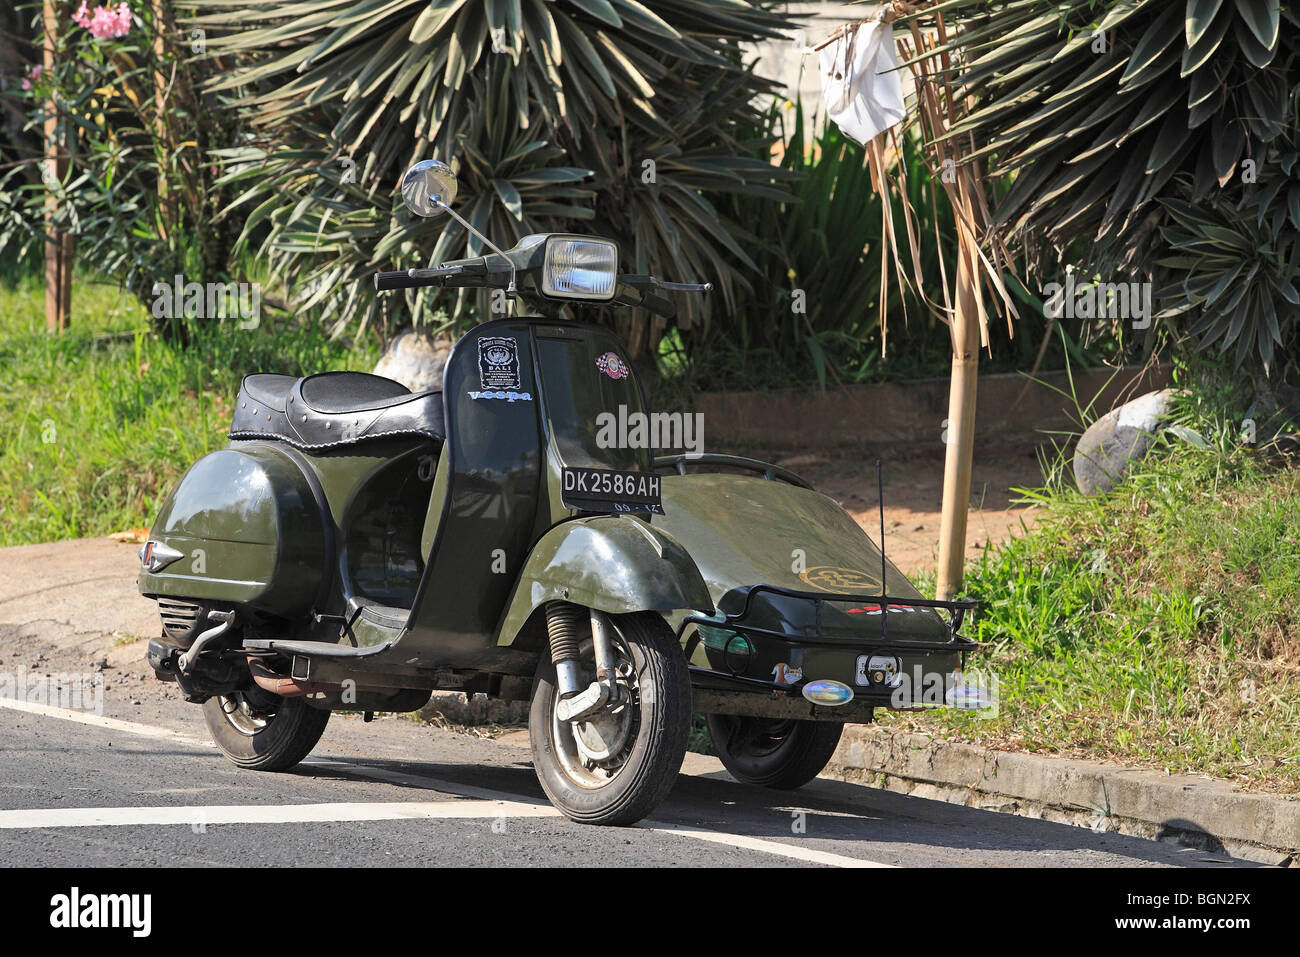 Green Vespa Piaggio scooter with Sidecar, Tegallelang Village, Ubud, Bali, Indonesia Stock Photo